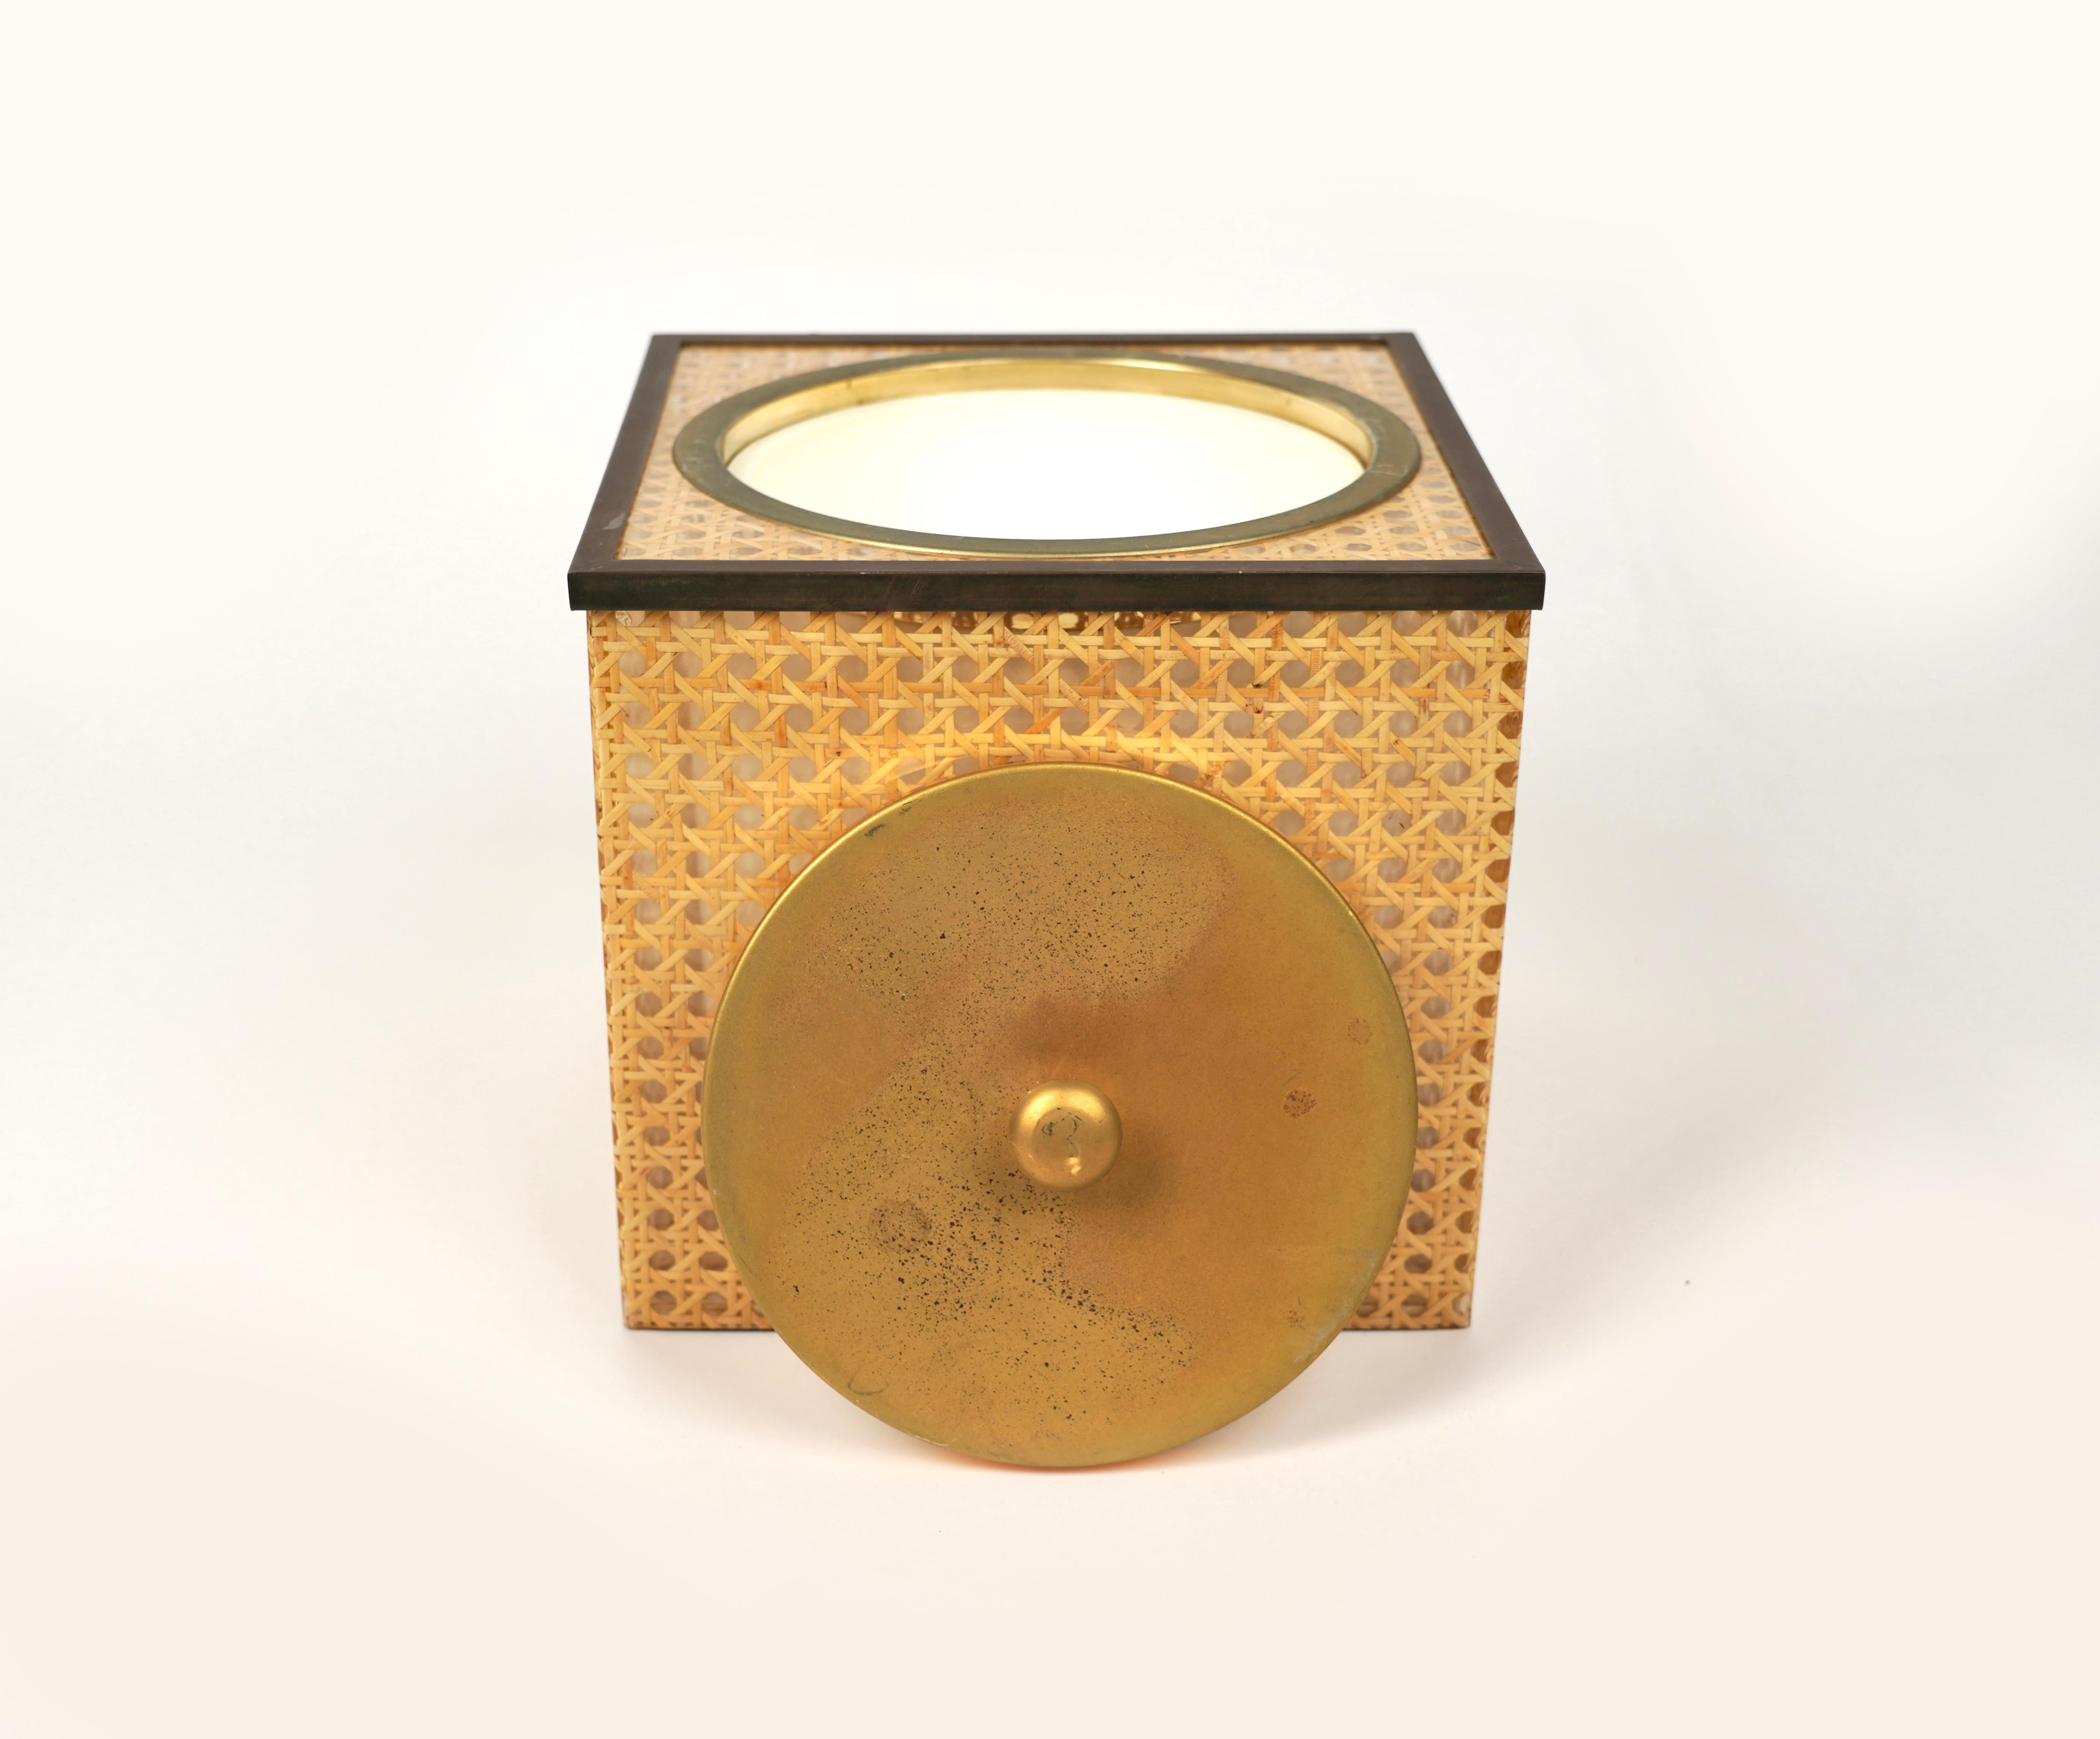 Cube Ice Bucket in Lucite, Rattan and Brass Christian Dior Style, Italy, 1970s For Sale 2